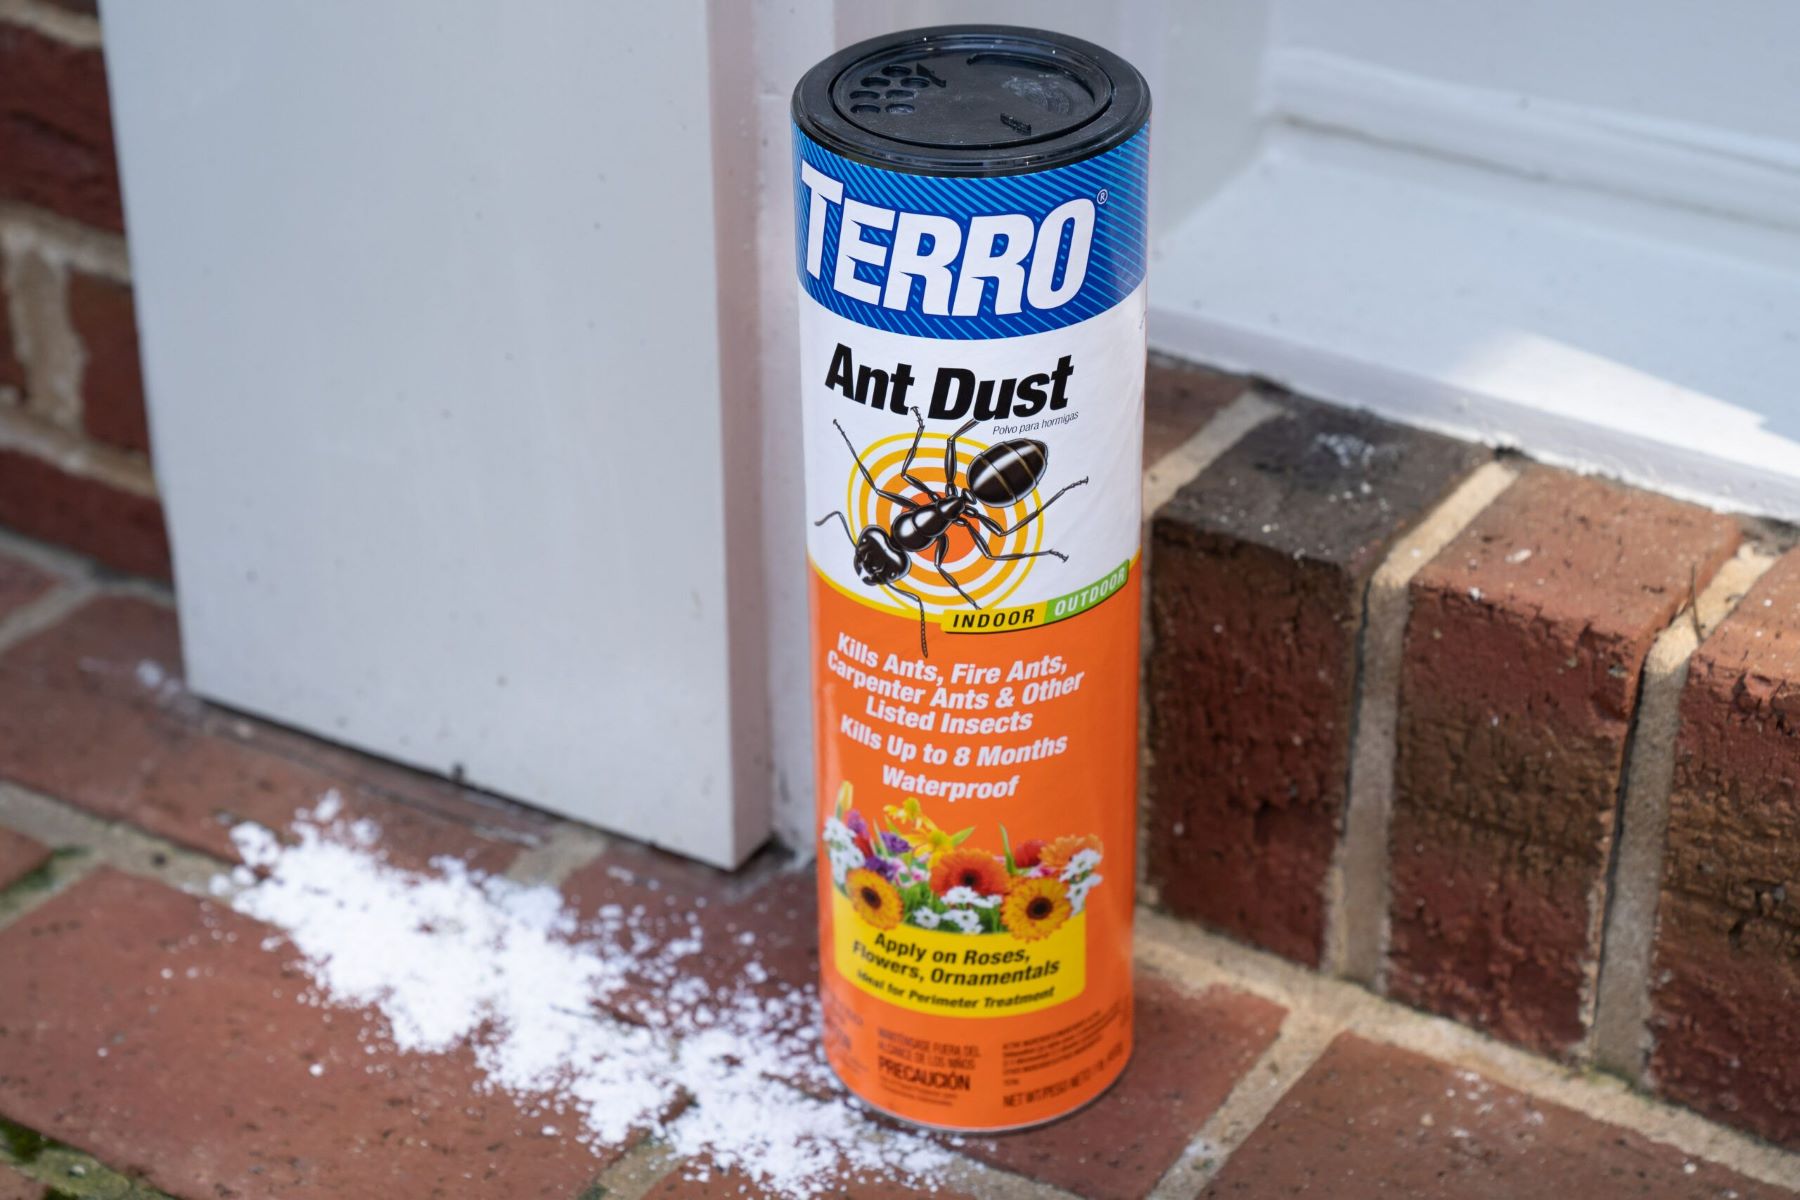 Discover The Surprising Safety Of Indoor Ant Sprays!